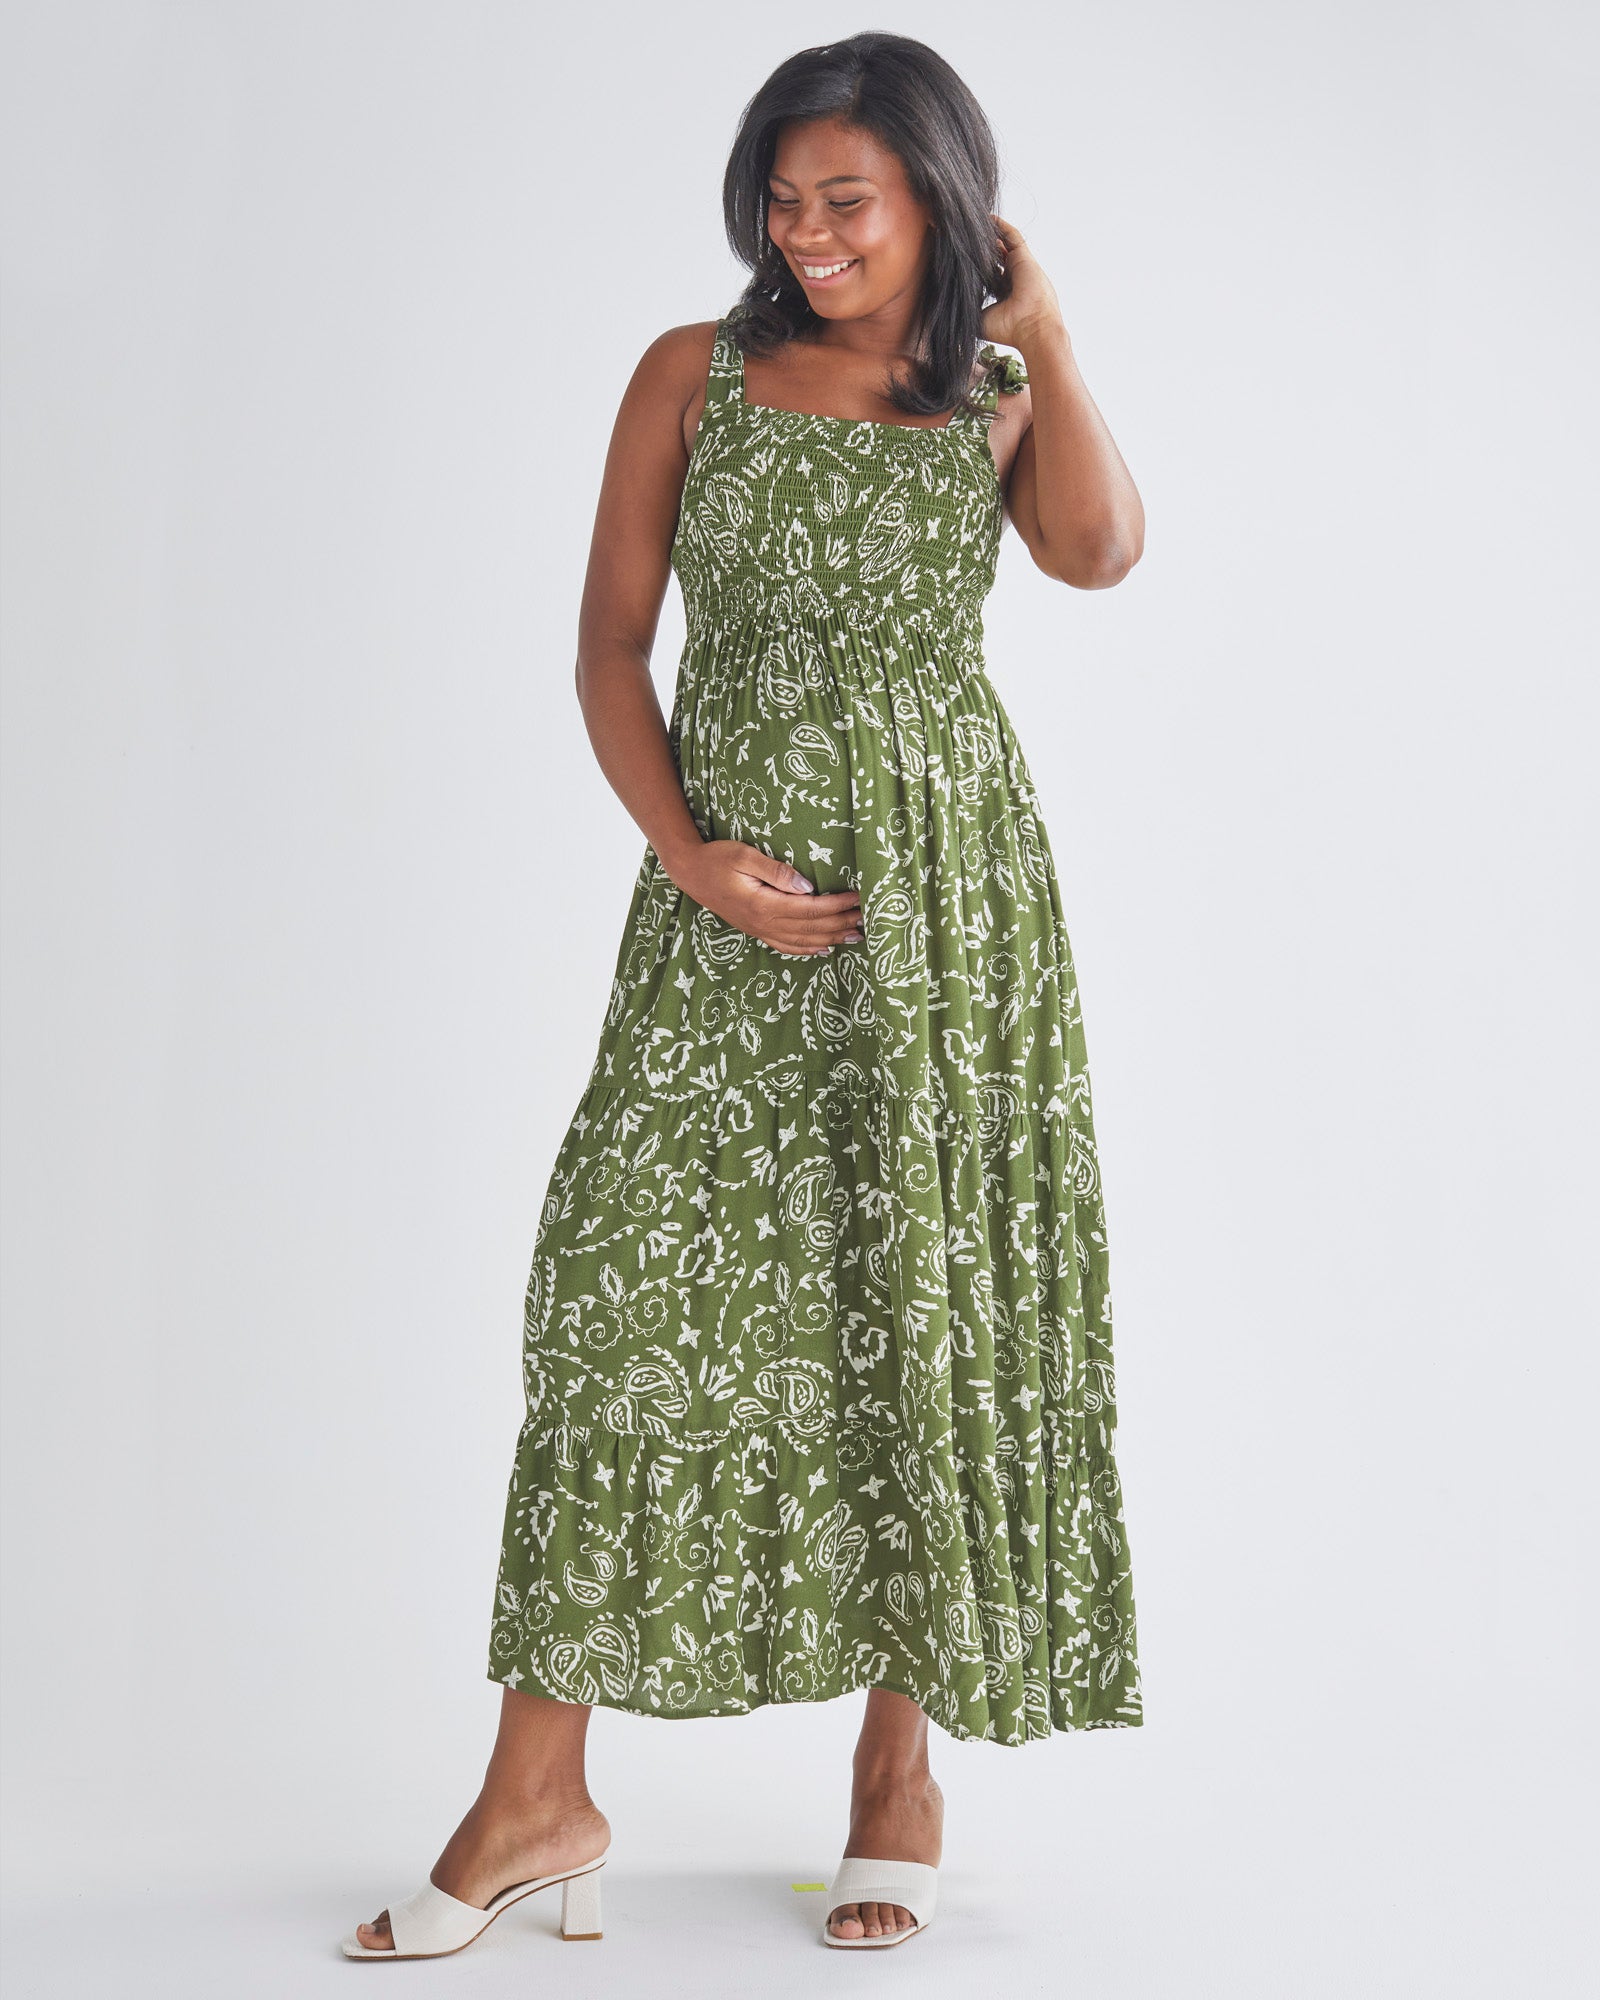 Maternity Green Dress in Paisley Print from Angel Maternity